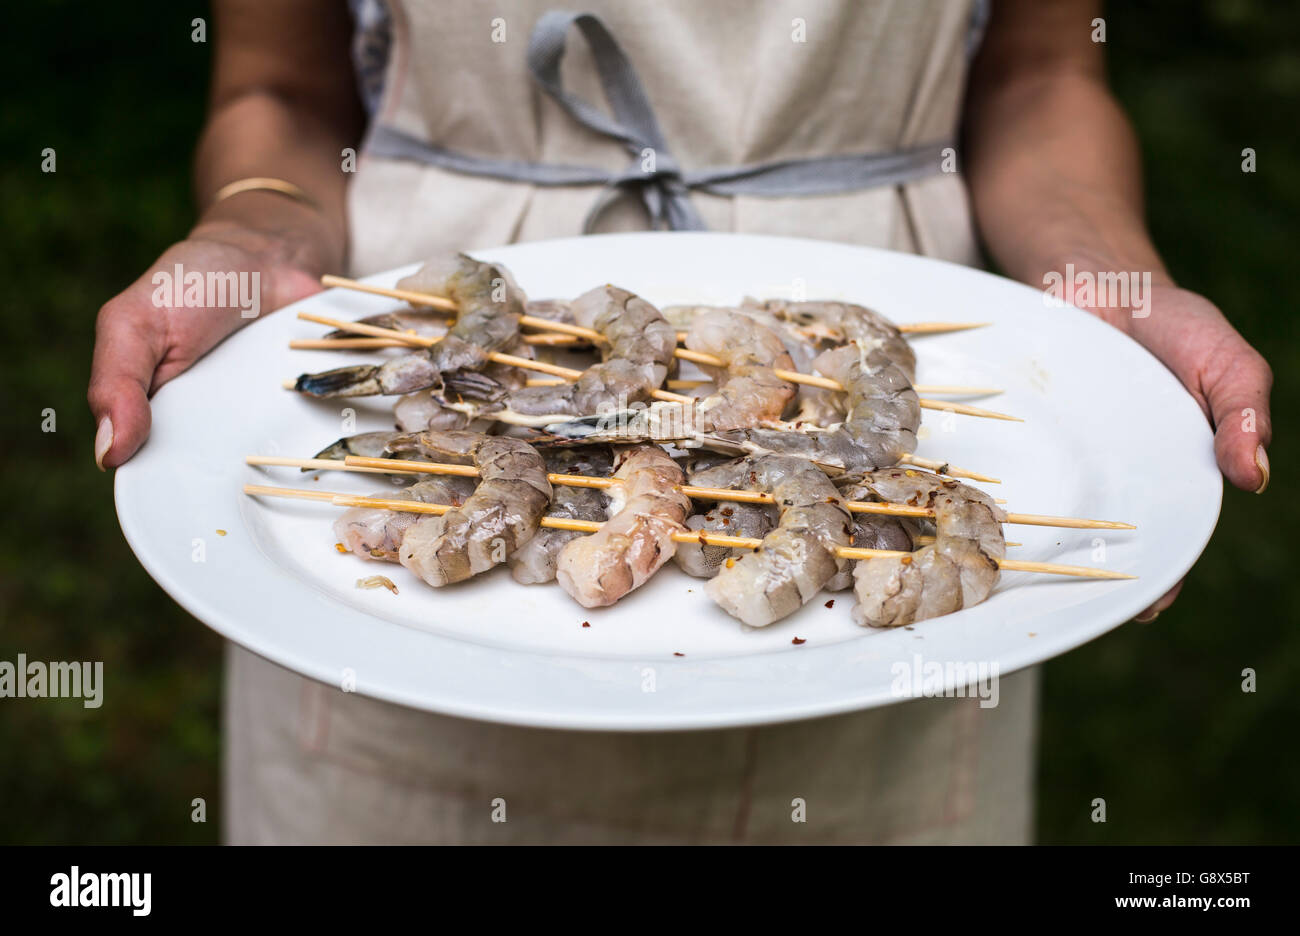 A woman is holding a plate of shrimp that are on skewers and ready for grilling. Stock Photo